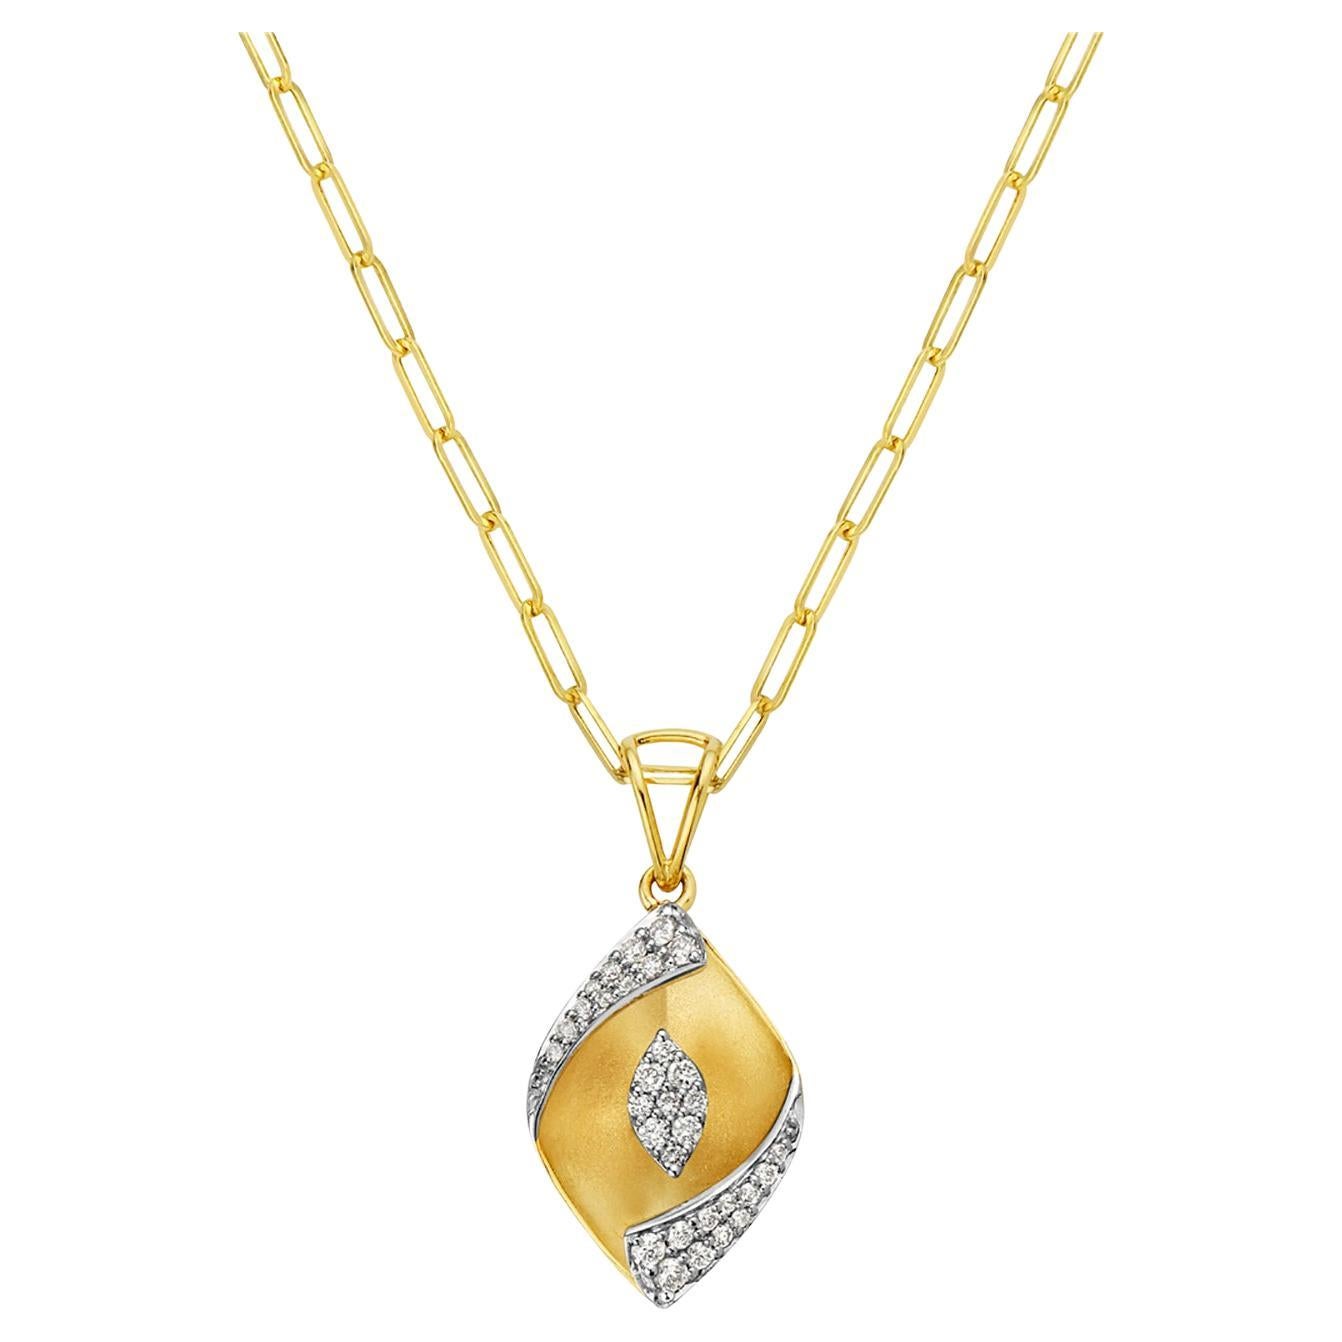 Petal Shaped Pendant with Depth Illusion Paved in Halo Diamonds in 14k Gold For Sale